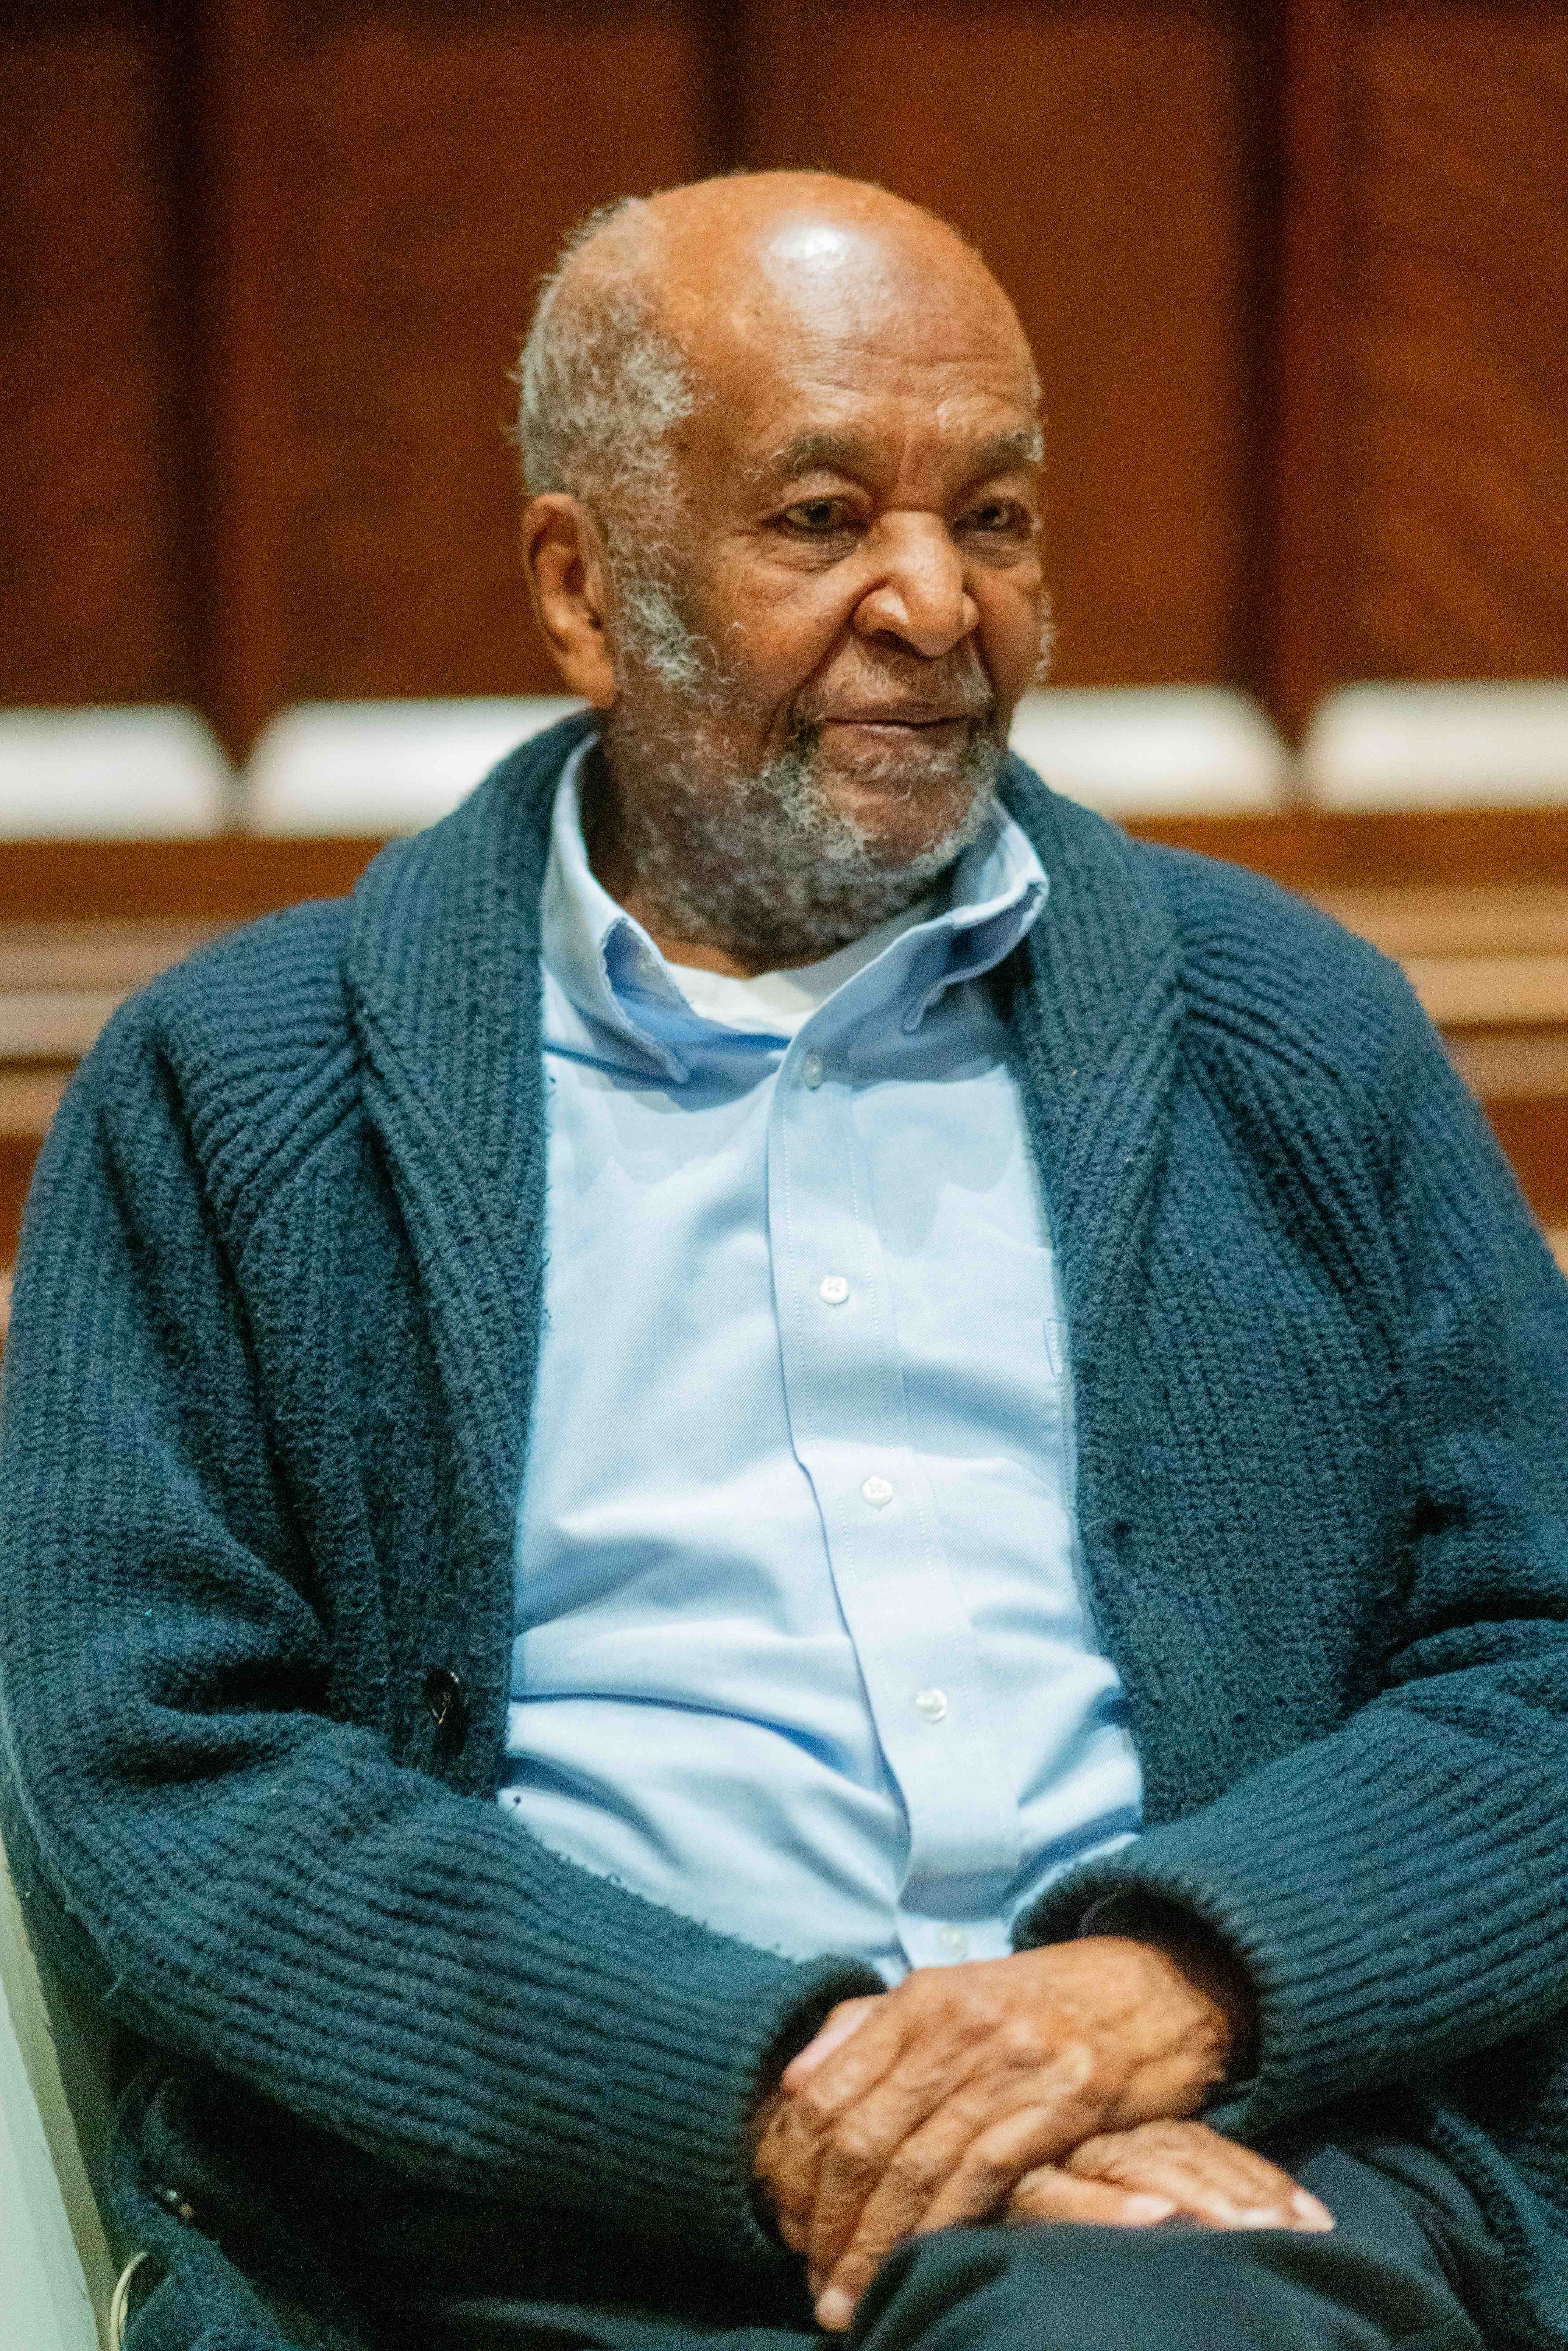 An elderly black man in a blue shirt and teal cardigan is sitting down with his hands folded on his lap